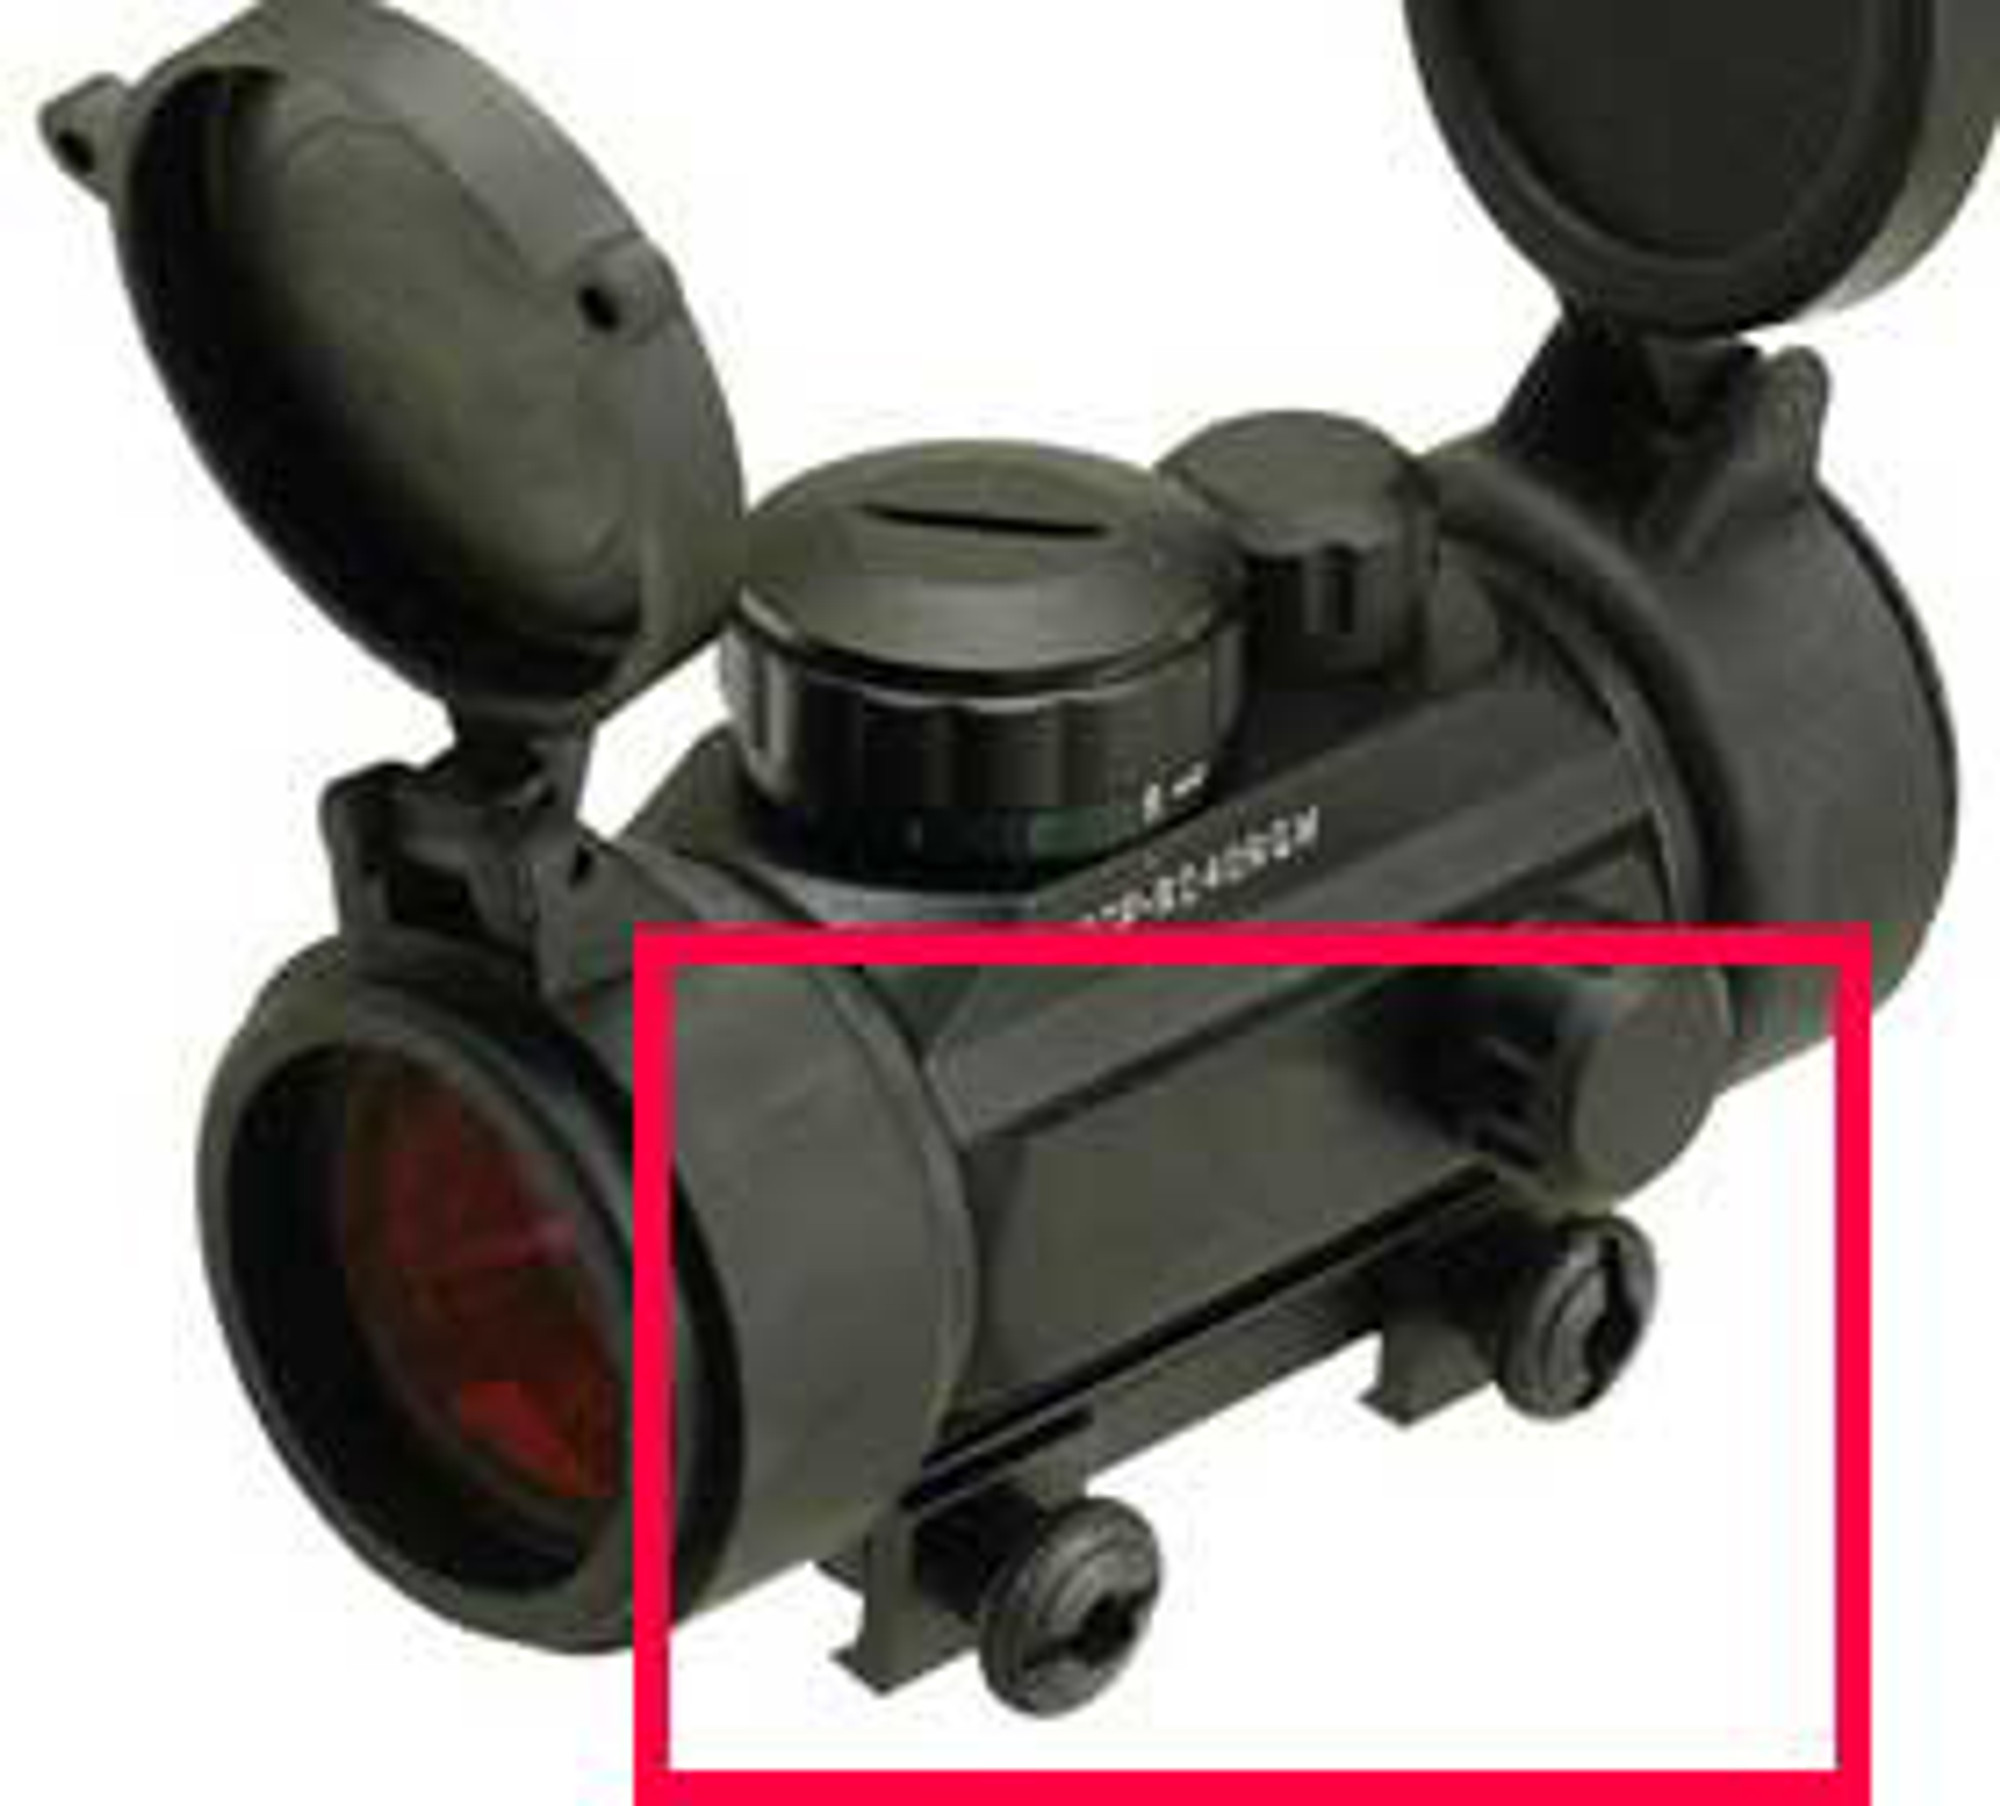 Spare QD Knobs for Matrix 1x30 (40, 50) Red / Green Red Dot Scope Series (Scope Not Included)